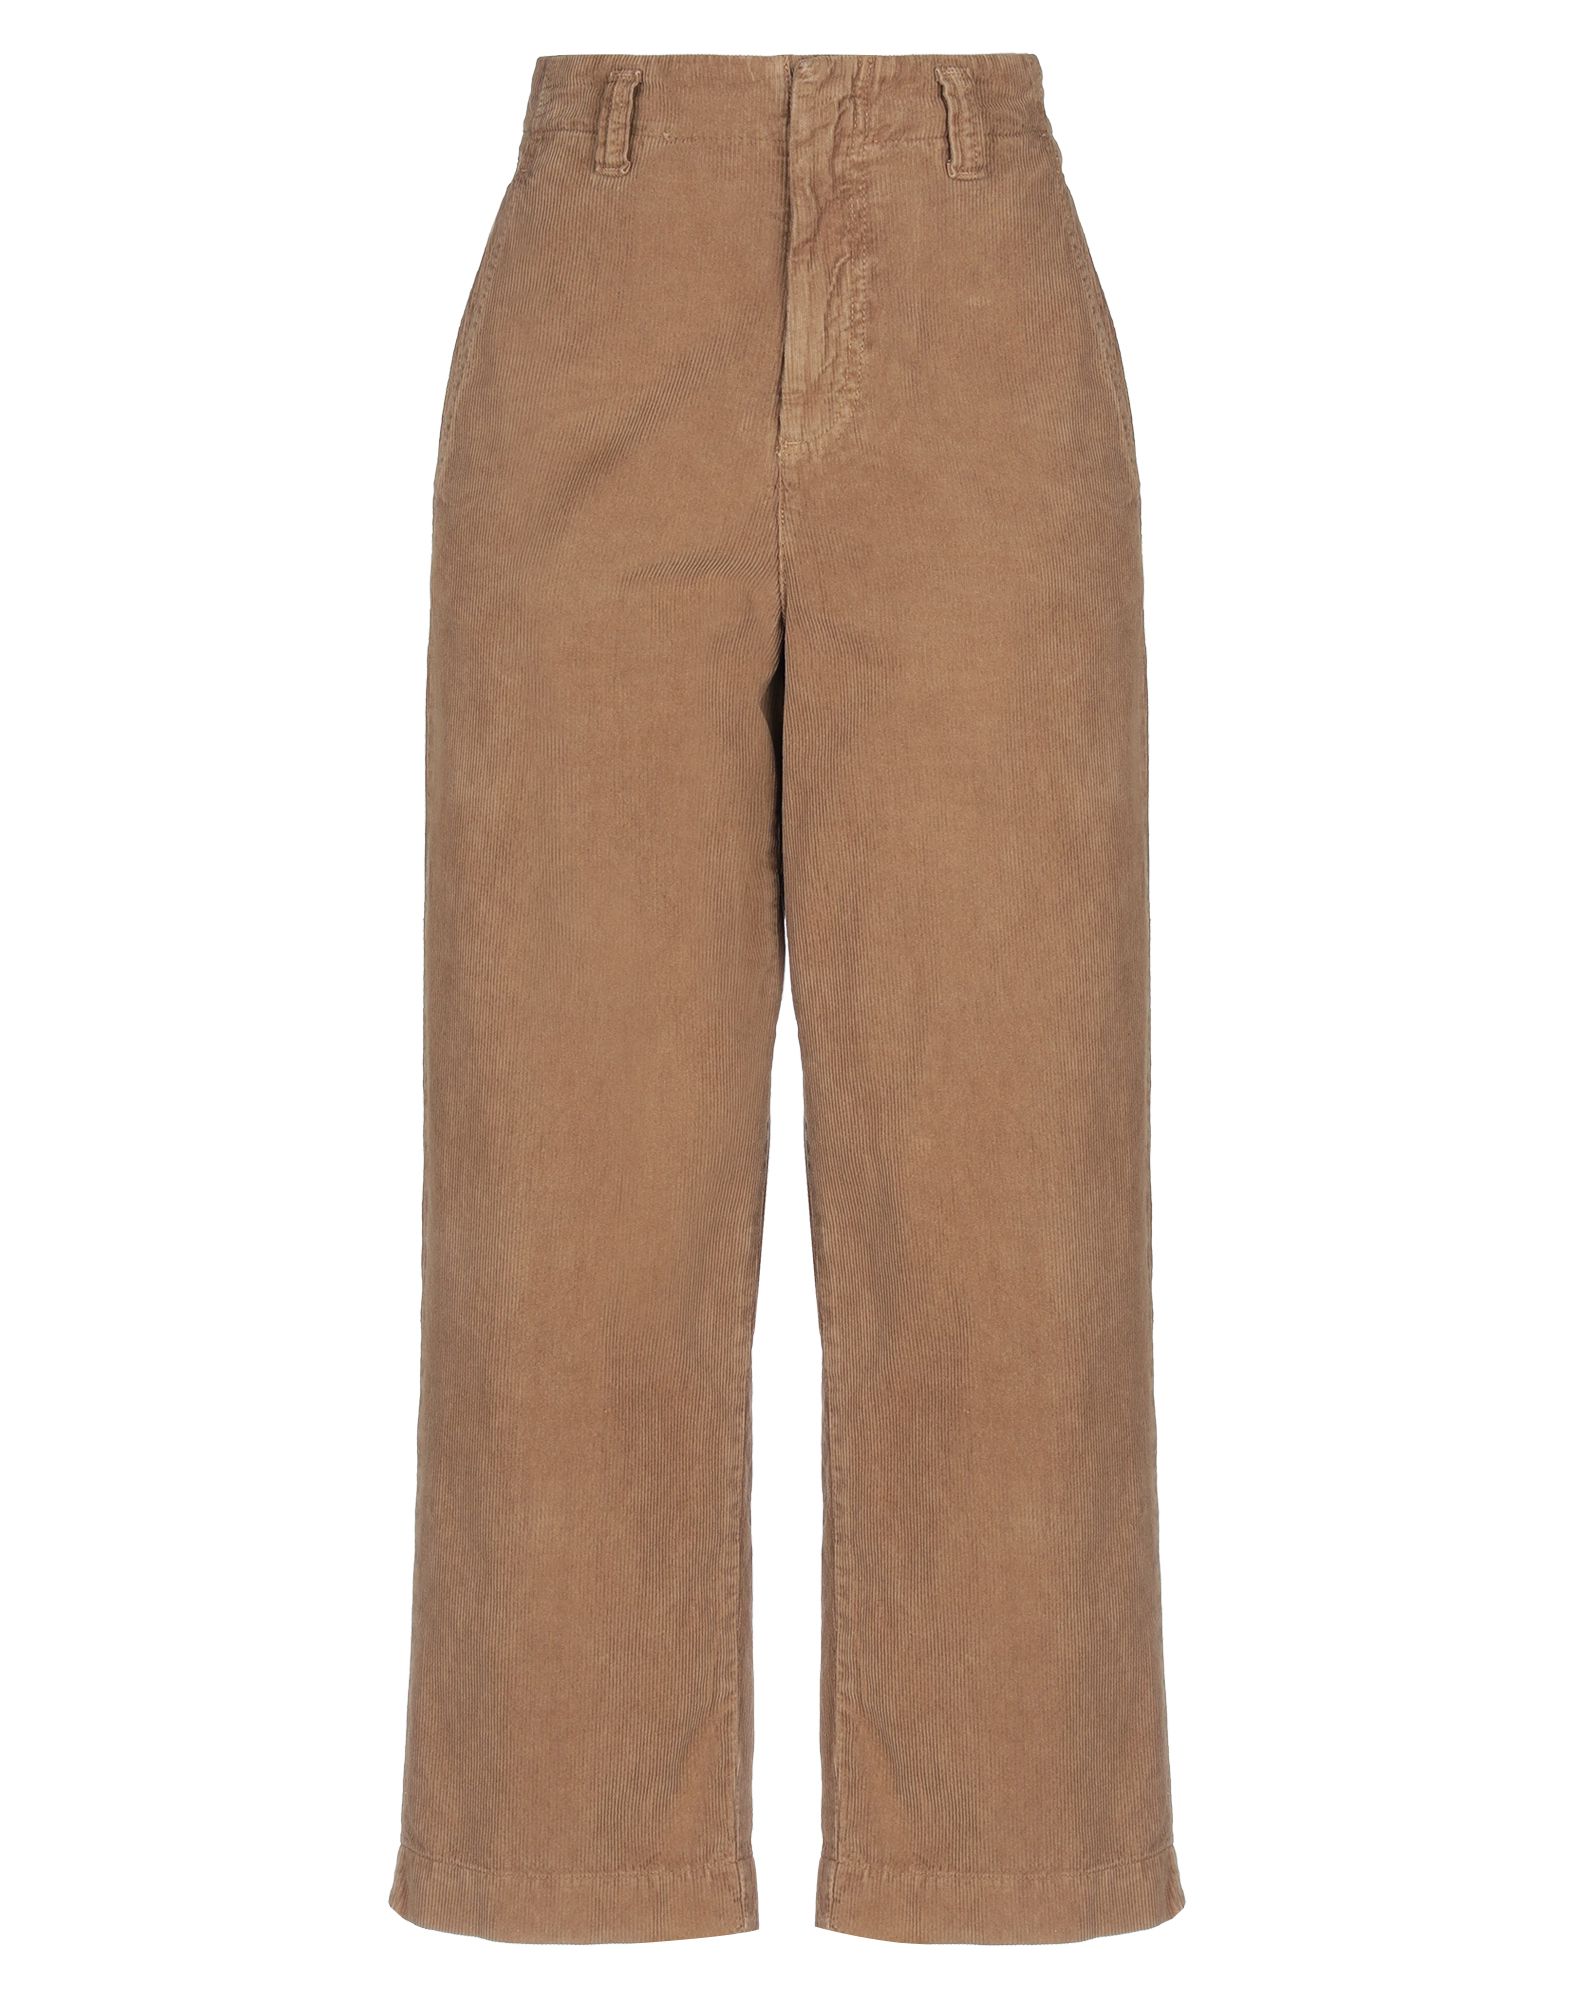 DIEGA DIEGA Casual pants from yoox.com | Daily Mail